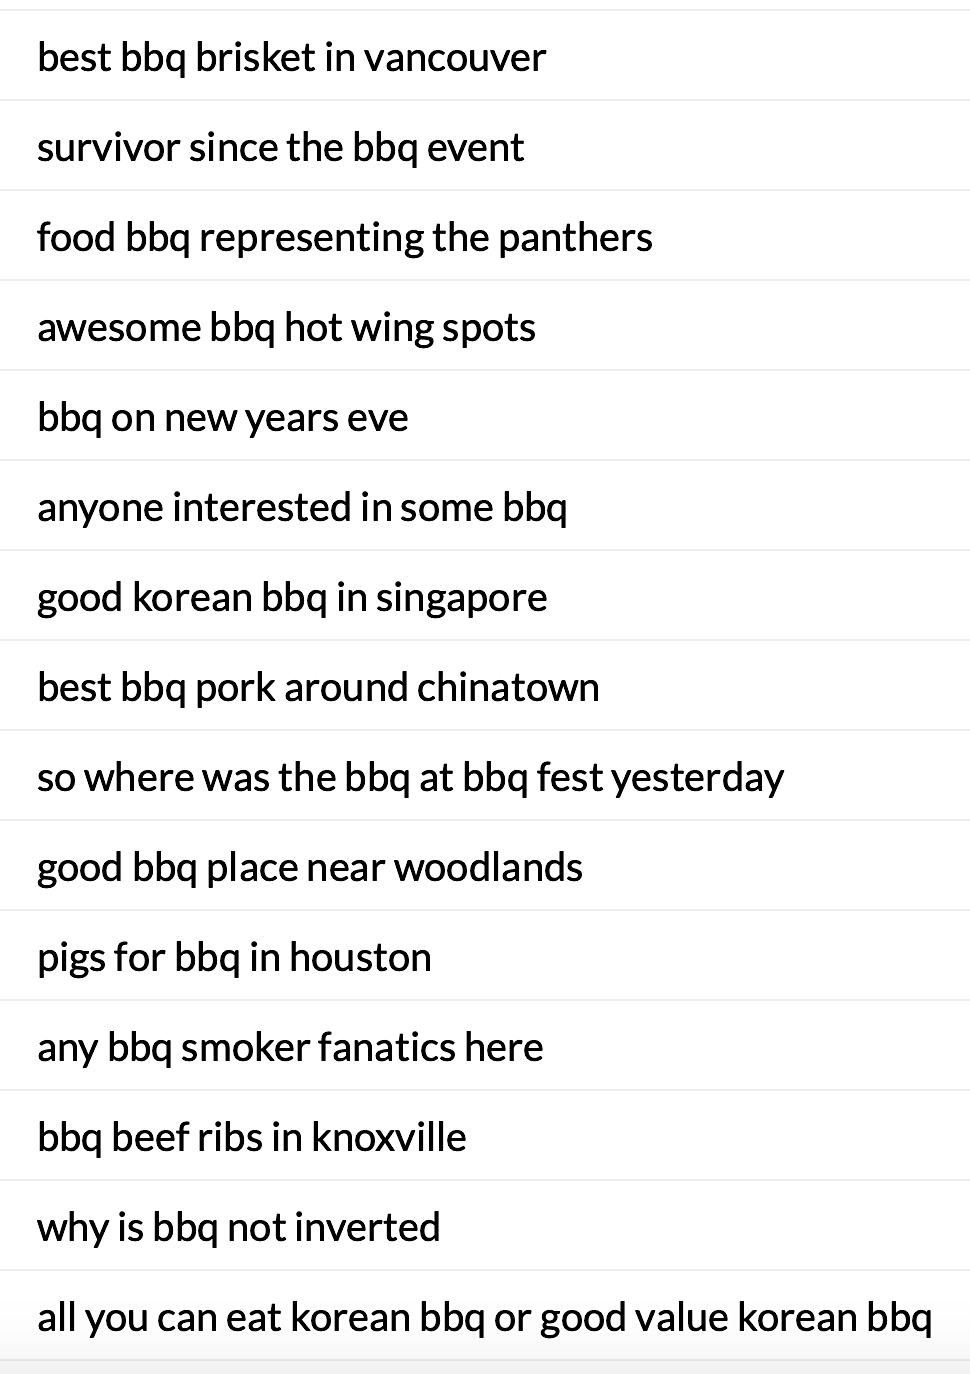 best bbq in Vancouver search